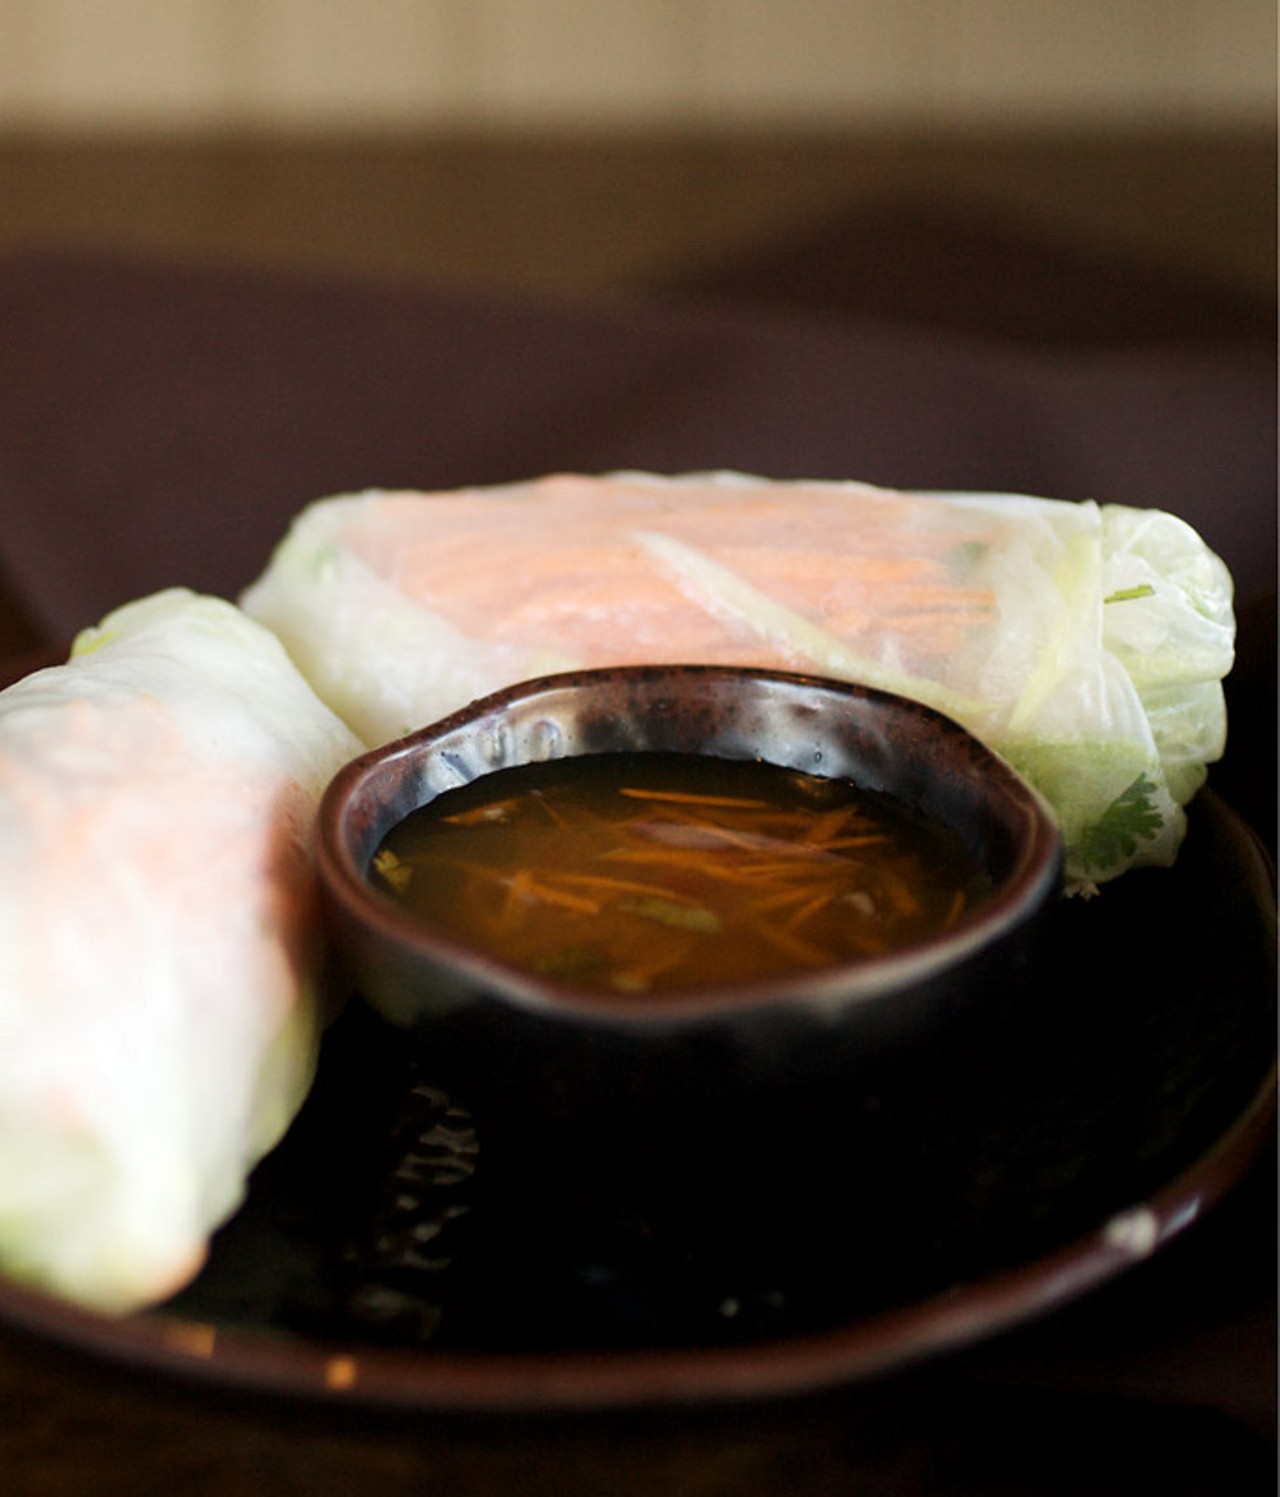 Wang Gang's Fresh Spring Rolls are prepared with shrimp, rice noodles, mint, Thai basil, cilantro and vegetables wrapped in rice paper. They are served with Nuoc Cham, a spicy Vietnamese dipping sauce.